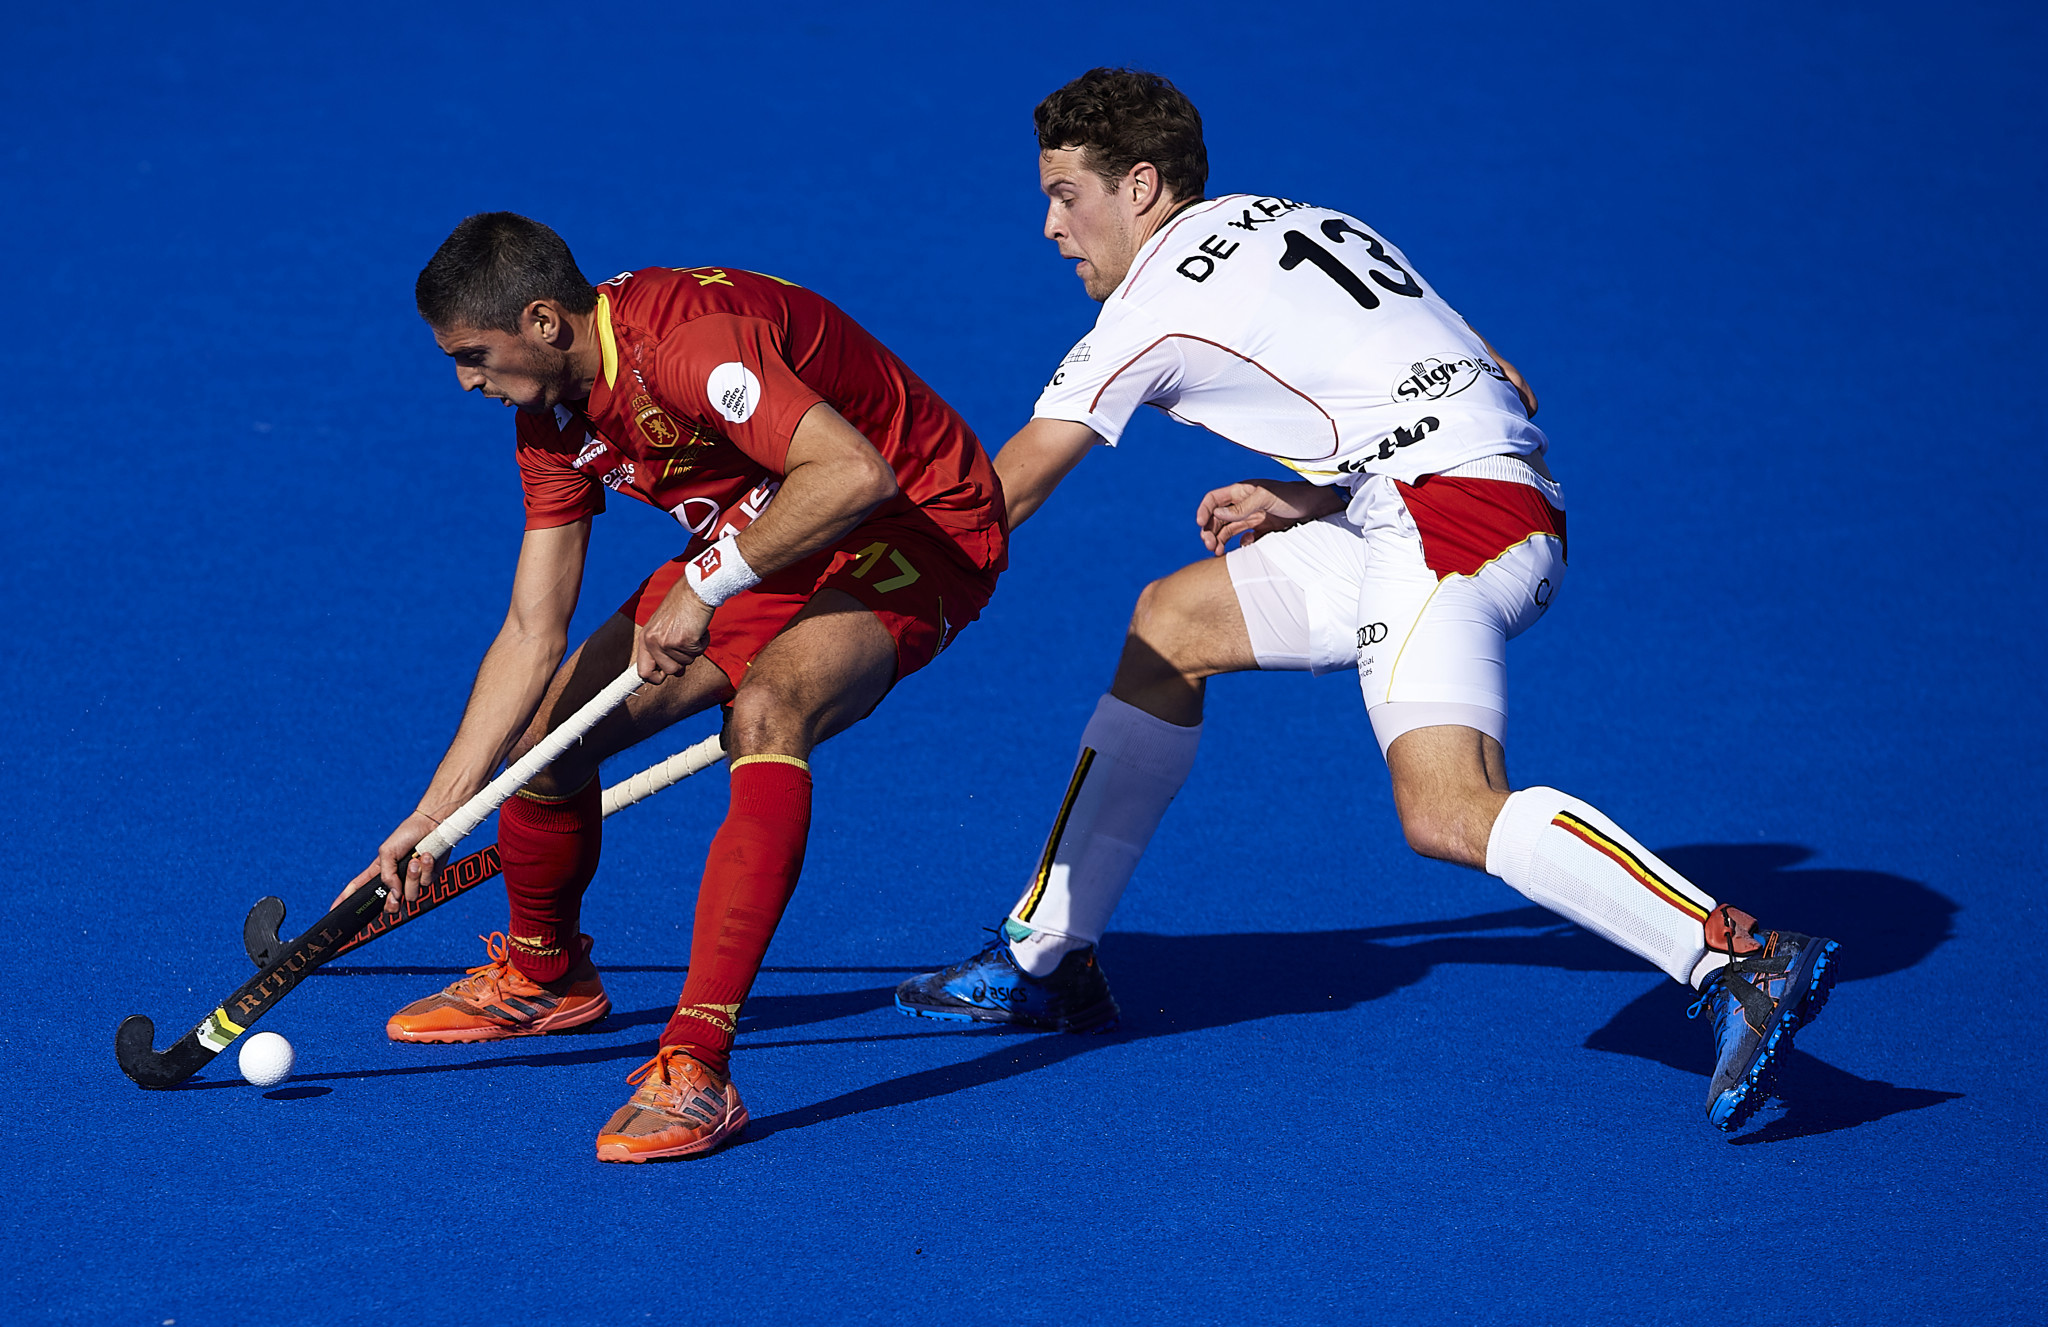 The rights include all FIH Pro League matches, the Tokyo 2020 Olympic qualifiers and the 2022 Hockey World Cups for the territories of Austria, Germany and Switzerland ©Getty Images